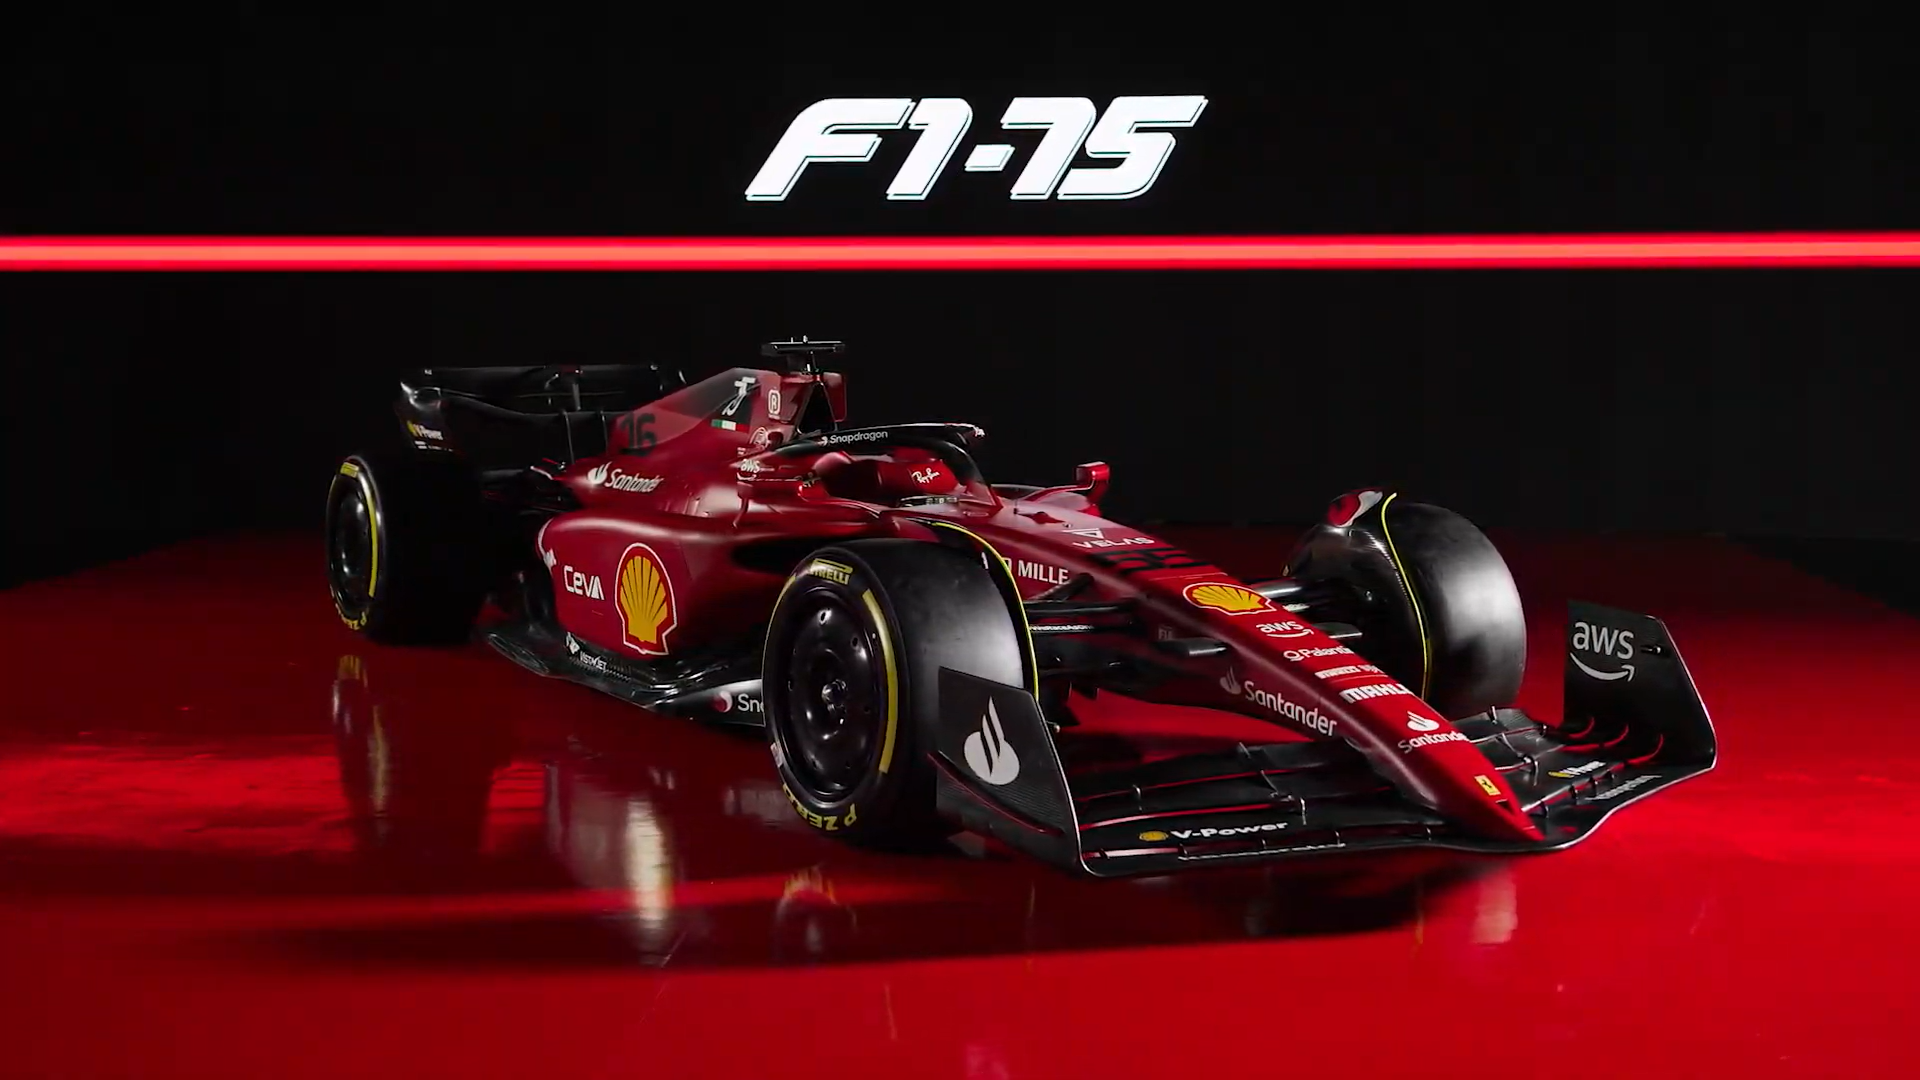 Ferrari Officially Unveils New Look F1 75 For 2022 F1 Season · RaceFans